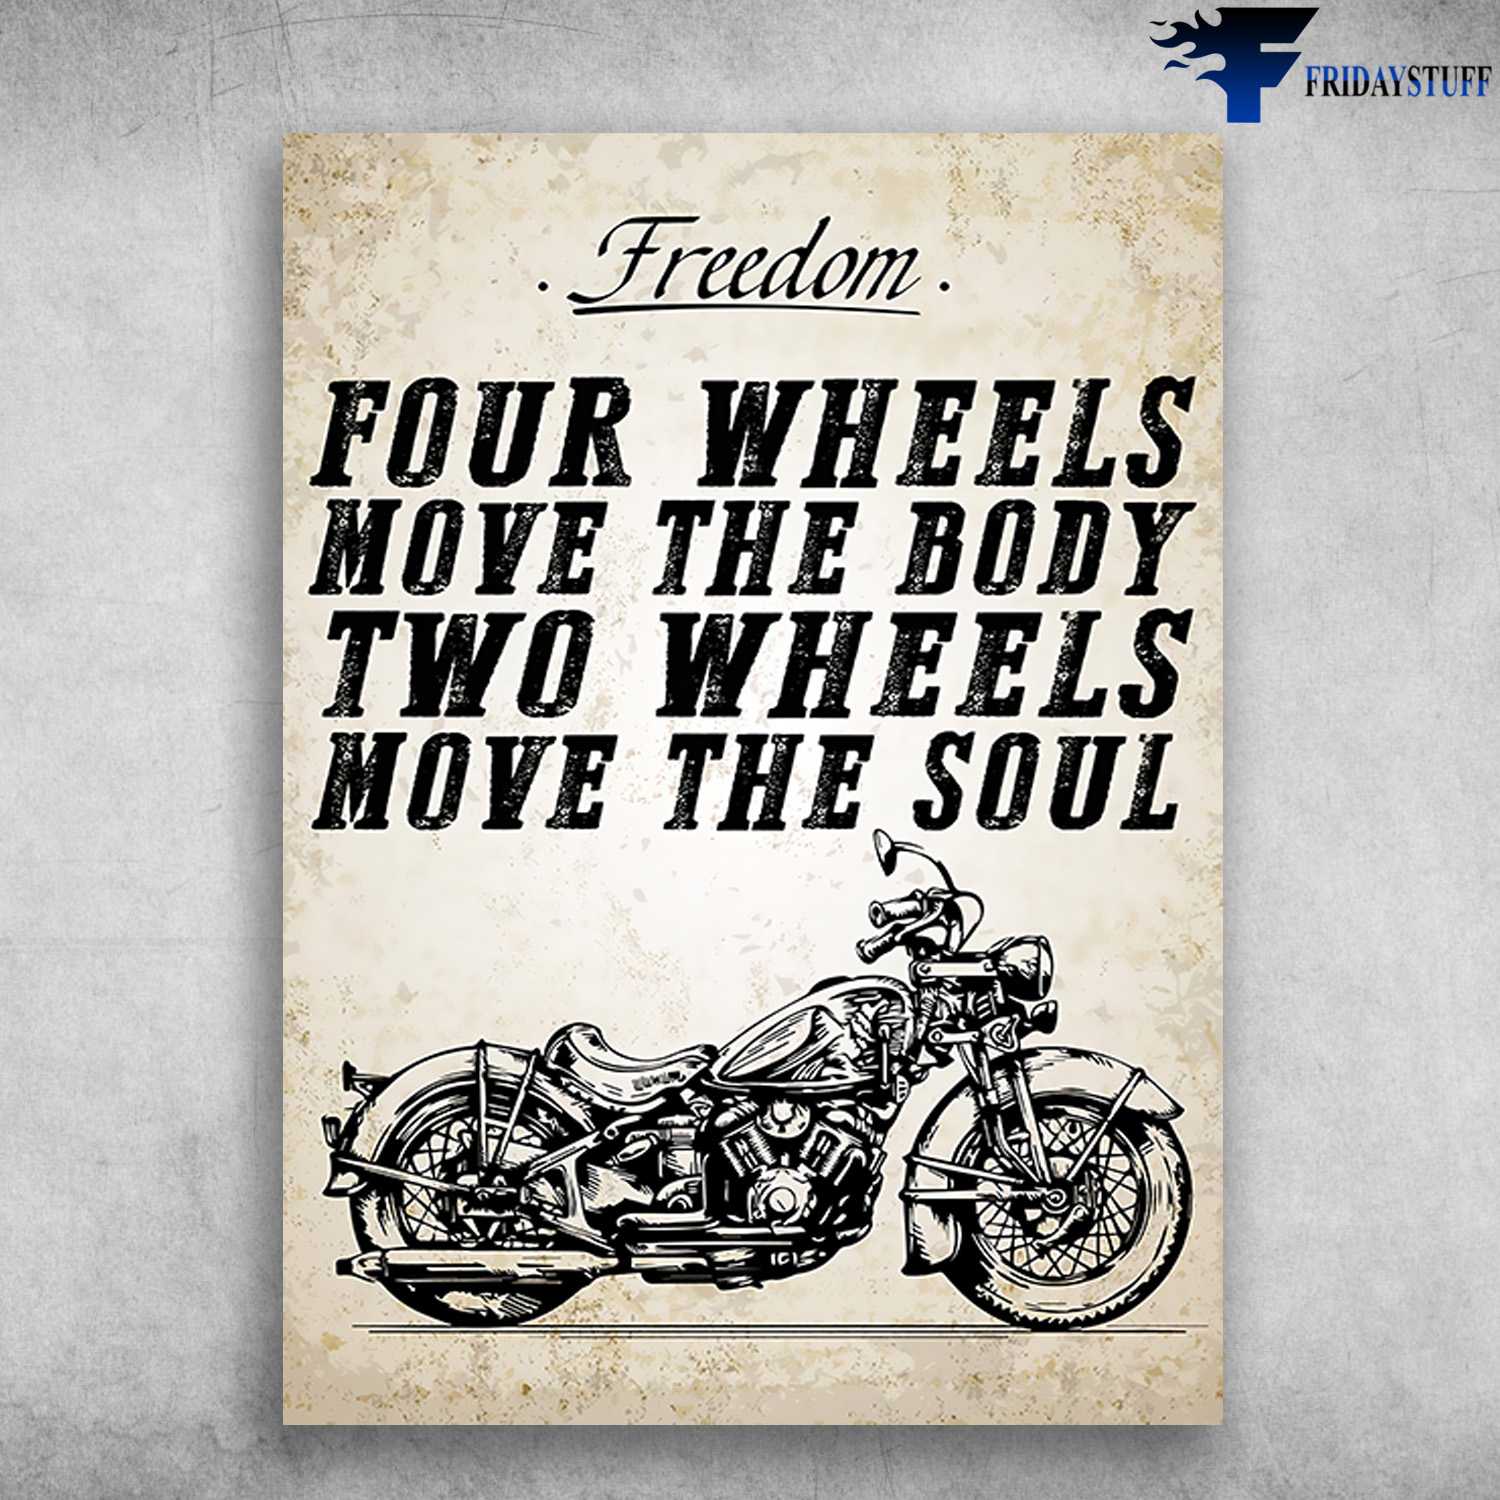 Biker Poster, Motorcycle Lover, Freedom, Four Wheels Move The Body, Two Whells Move The Soul